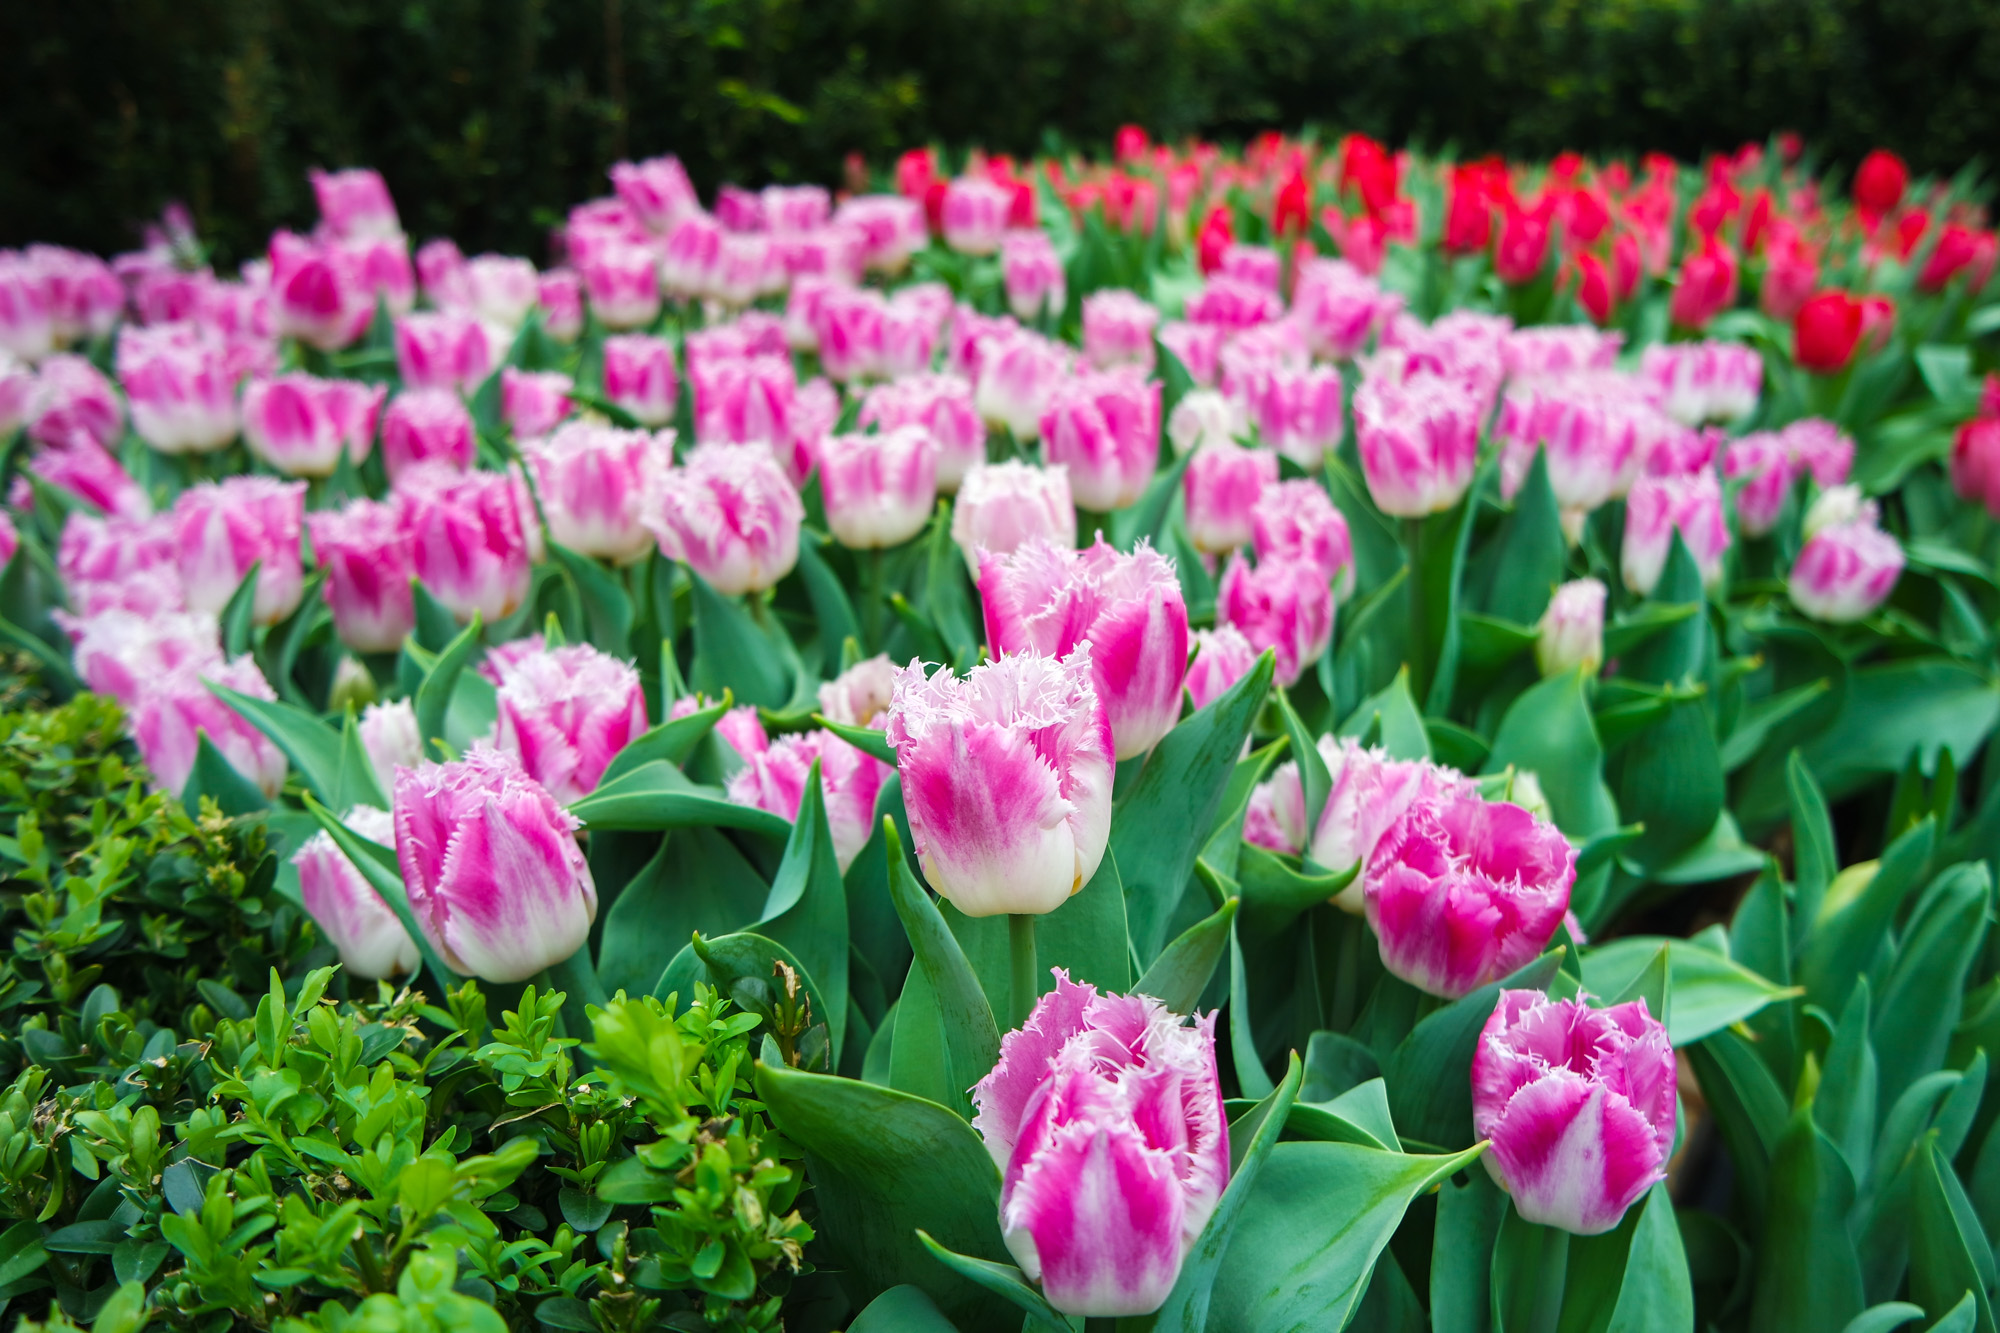 Tulipmania Rediscovered at Gardens by the Bay 